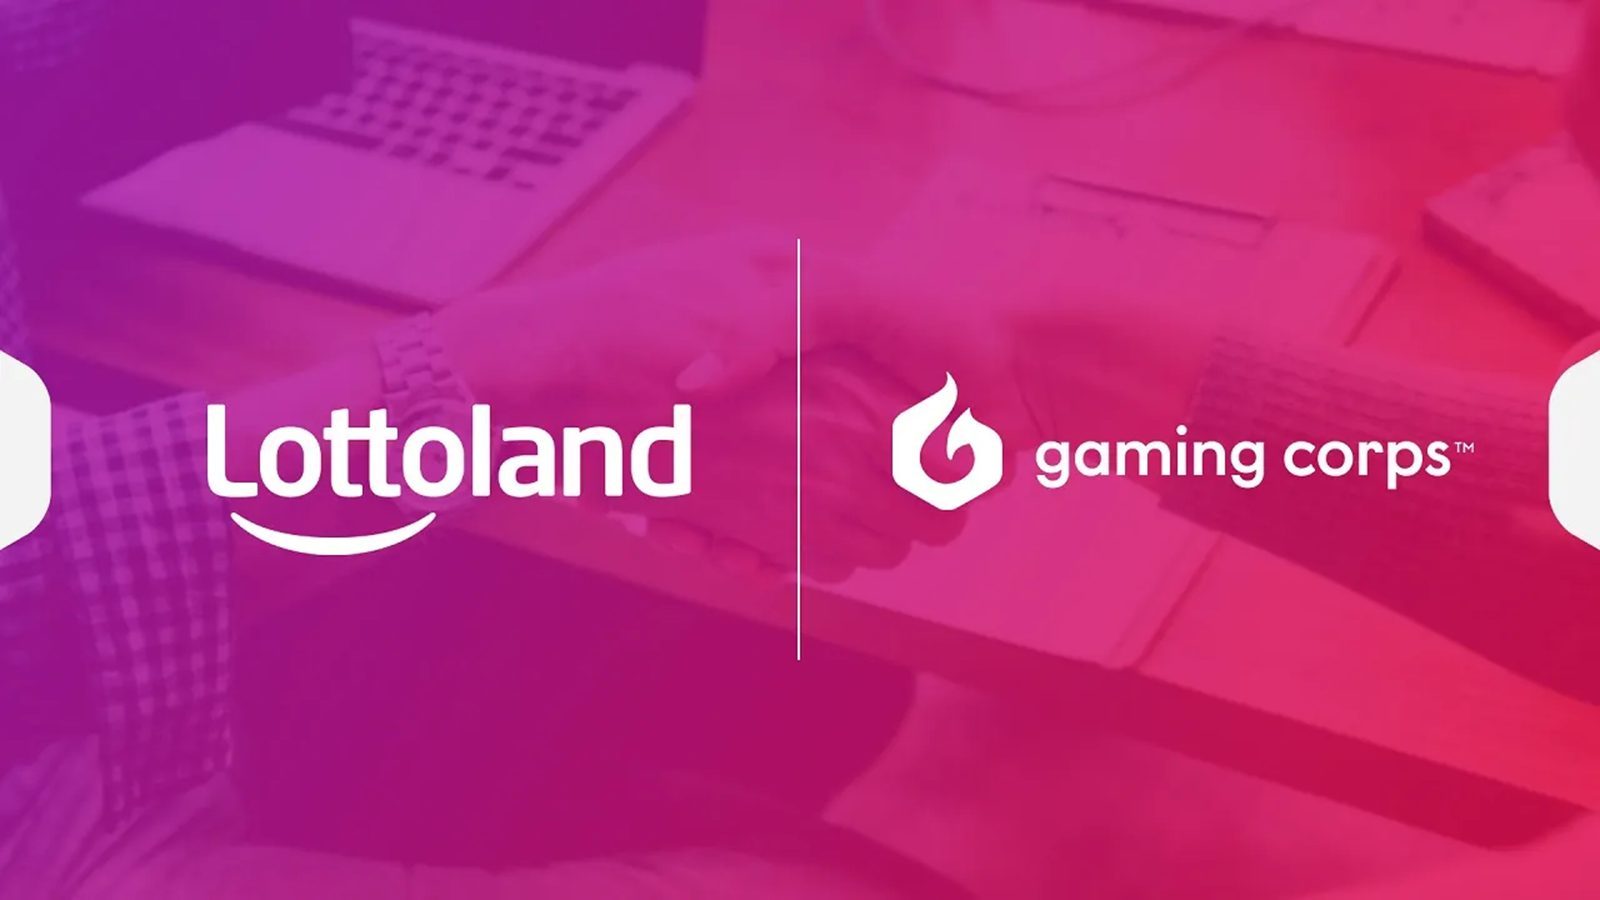 Gaming Corps Elevates Lottoland Experience